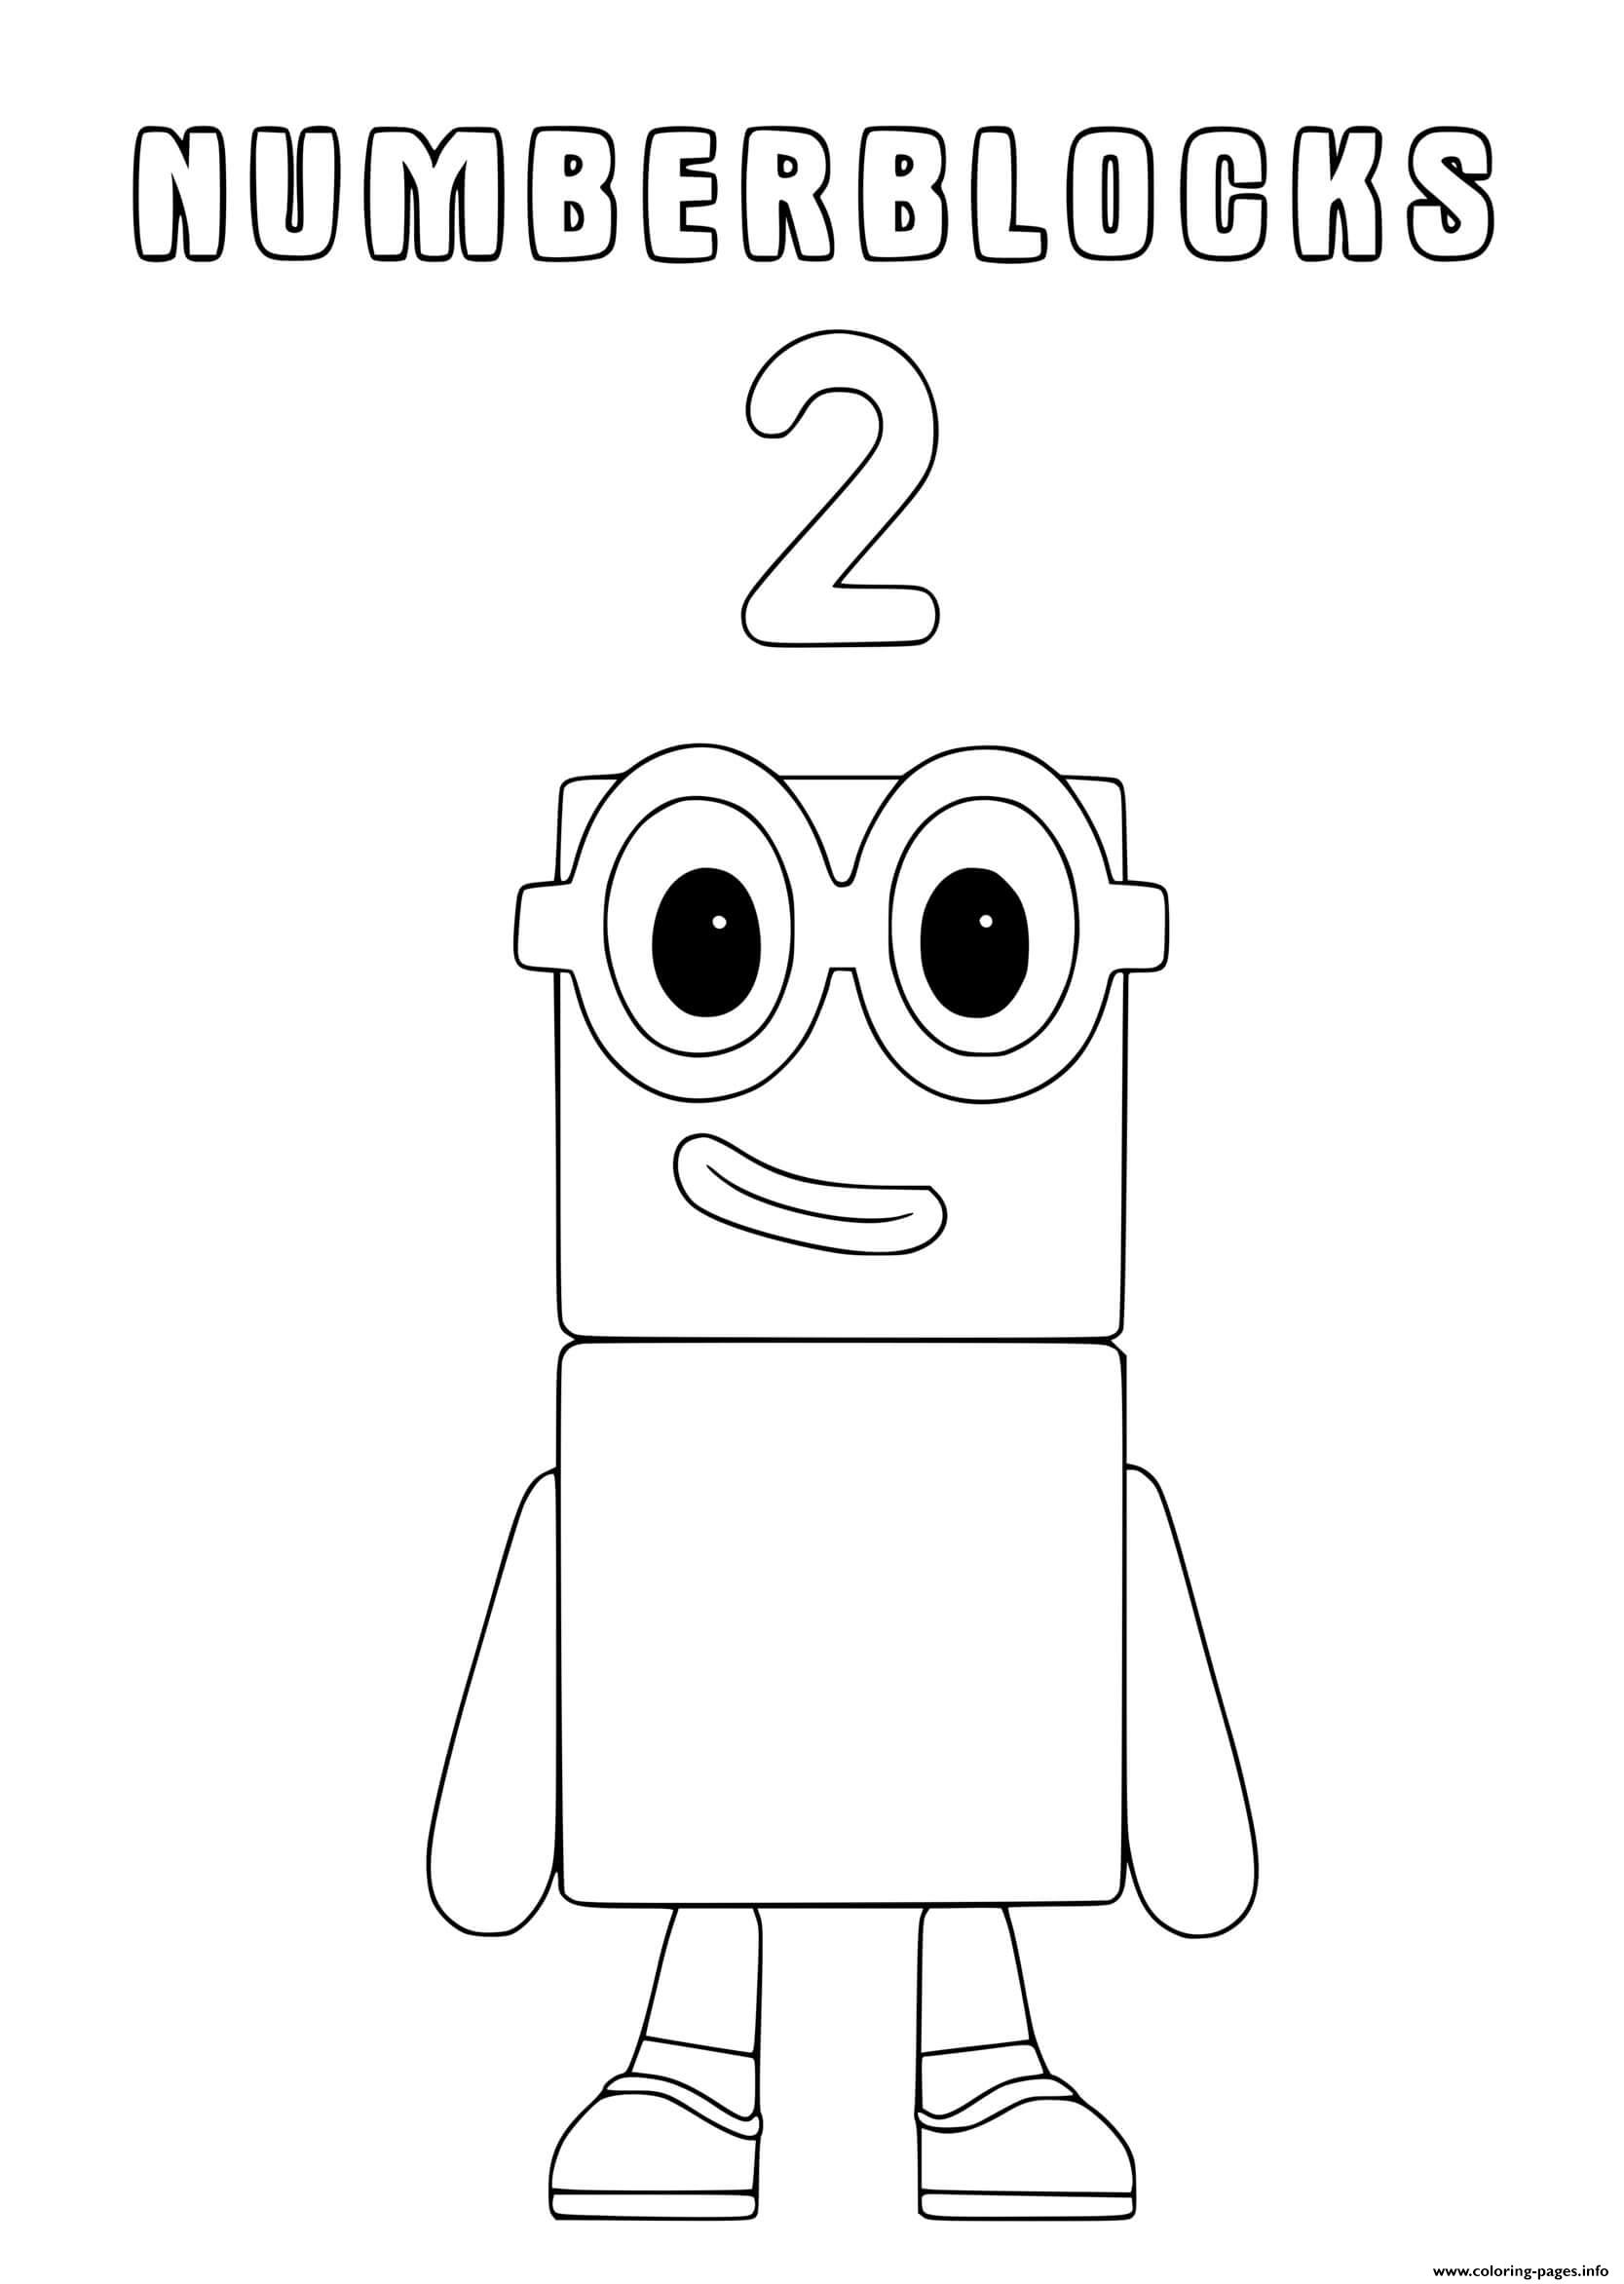 numberblocks-8a-printable-coloring-page-coloring-pages-coloring